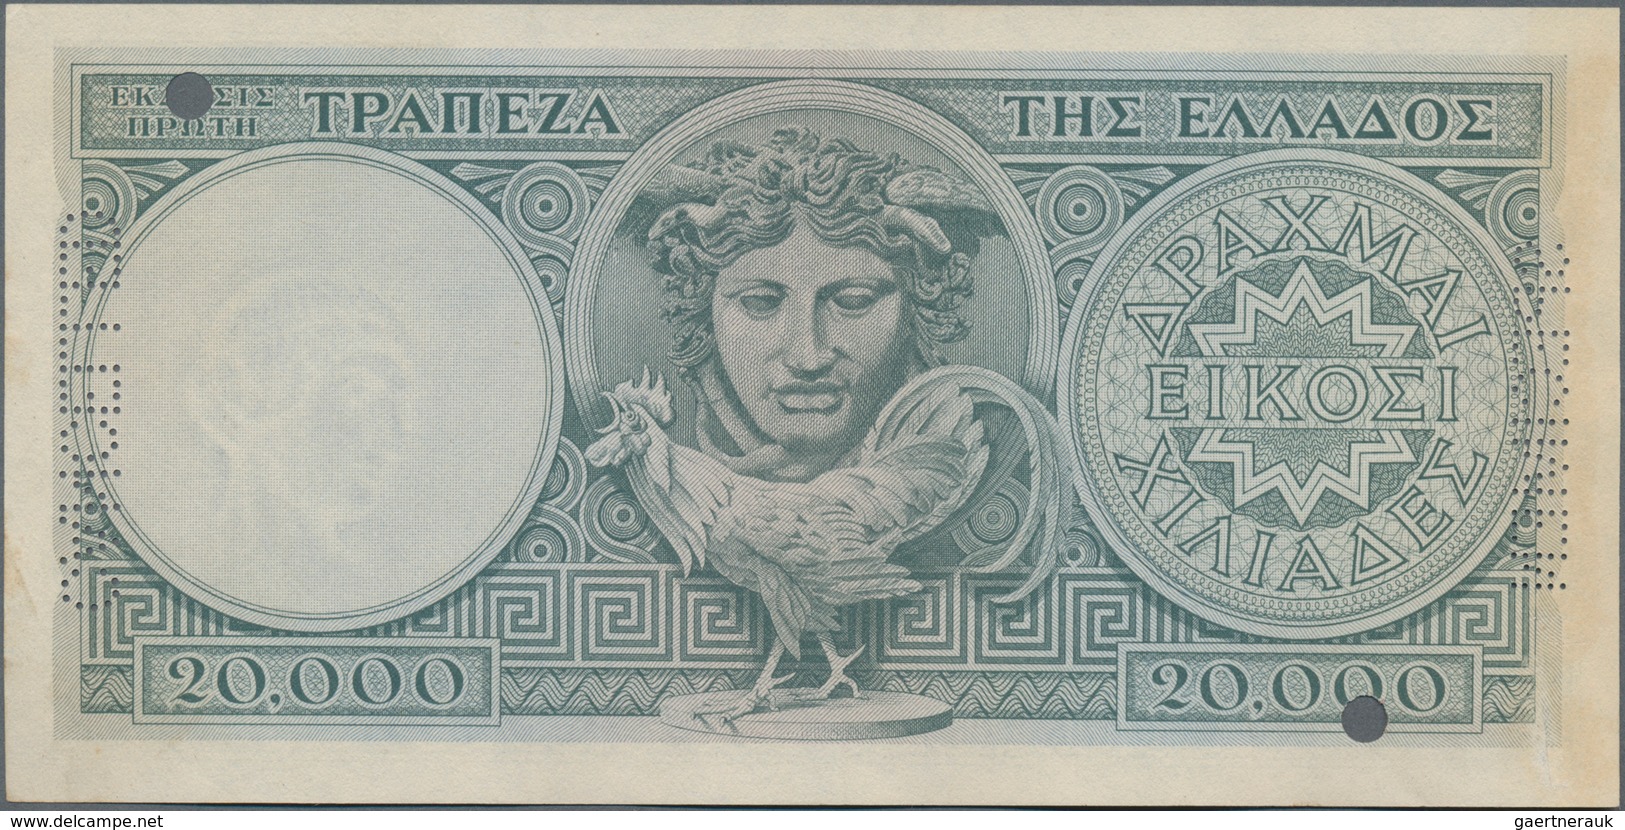 Greece / Griechenland: 20.000 Drachmai ND(1946) SPECIMEN, P.176s With Serial Number K.01 000000, Red - Grecia